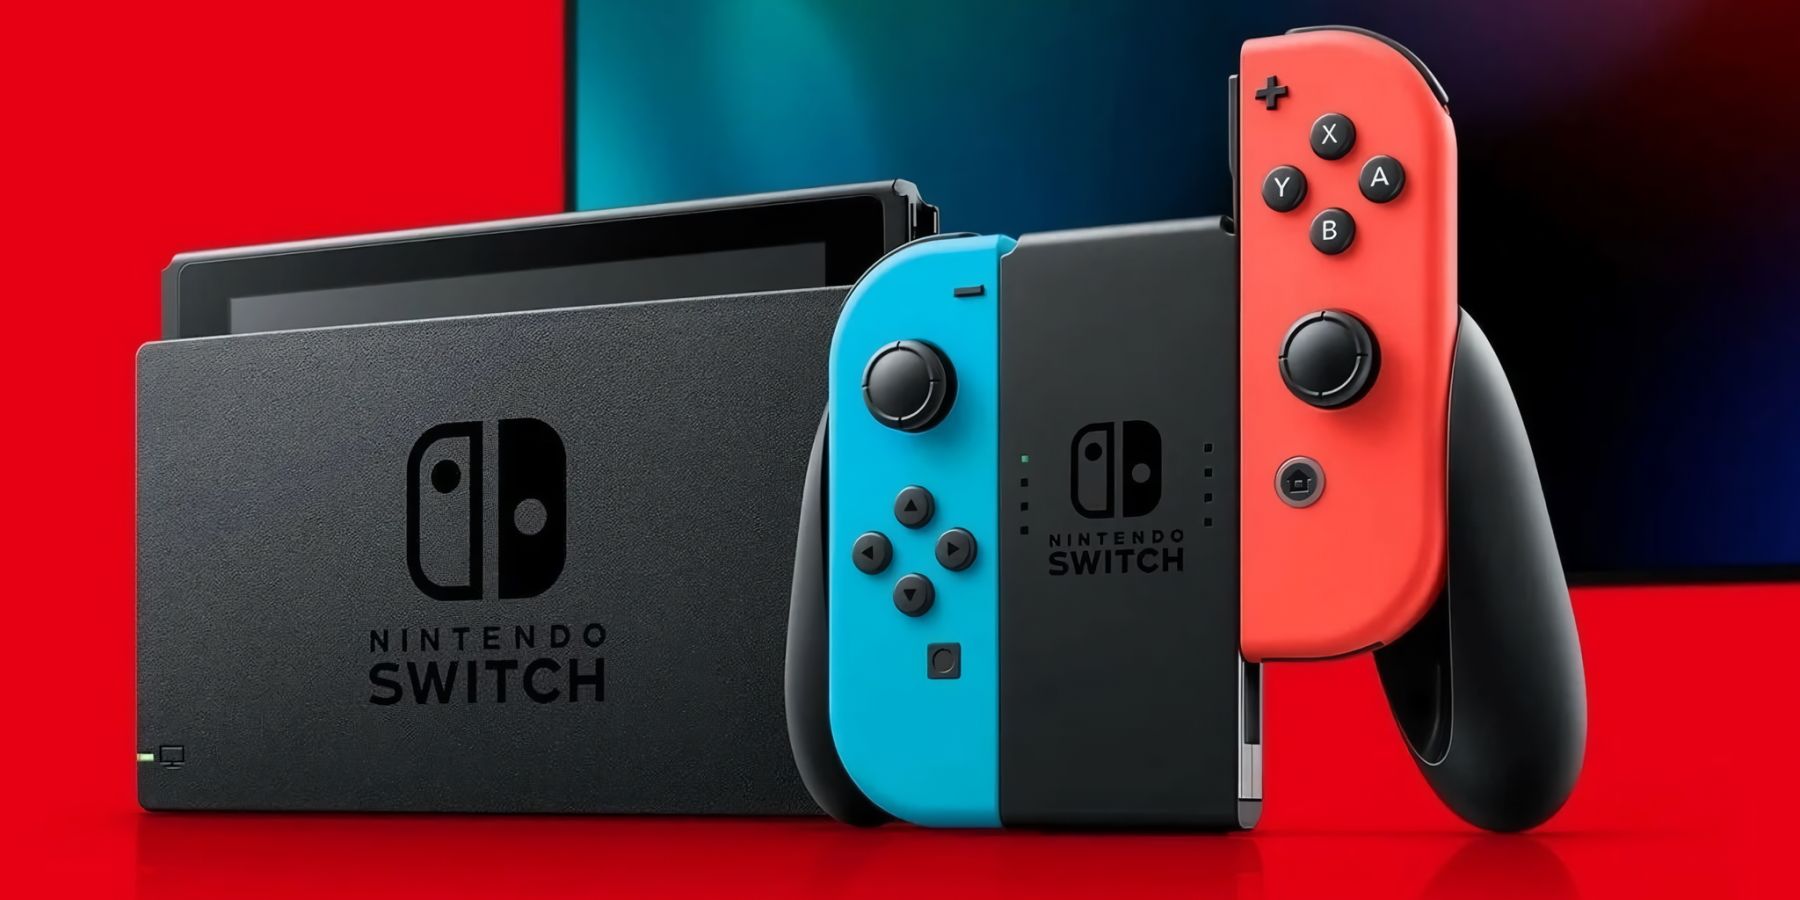 A promotional image for a Nintendo Switch, showing the docked console and the JoyCon controllers.